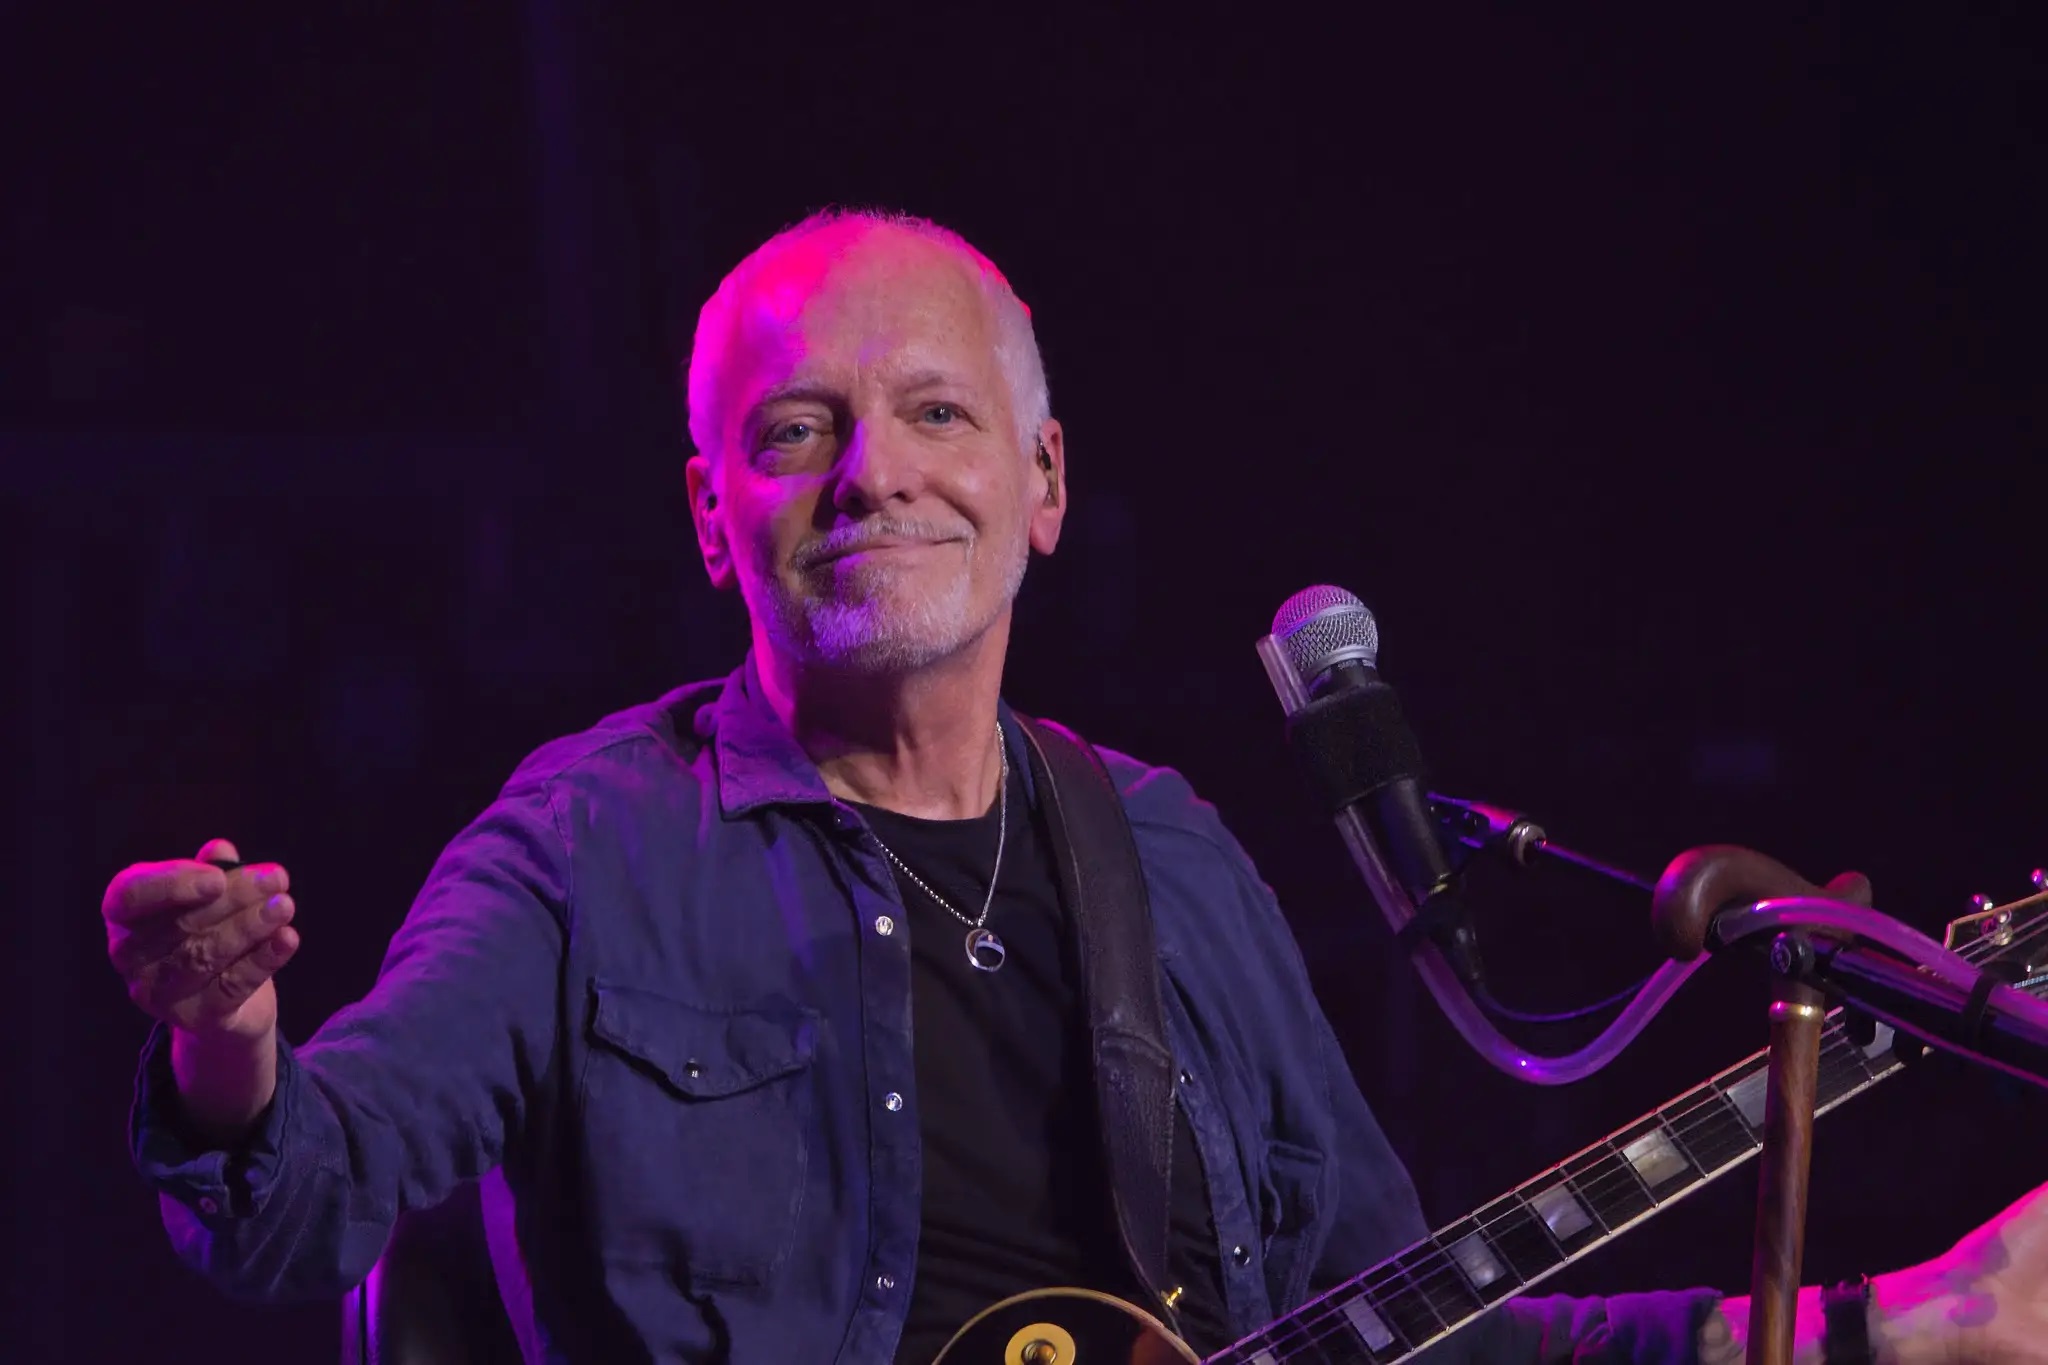 Peter Frampton nominated for Rock & Roll Hall of Fame induction